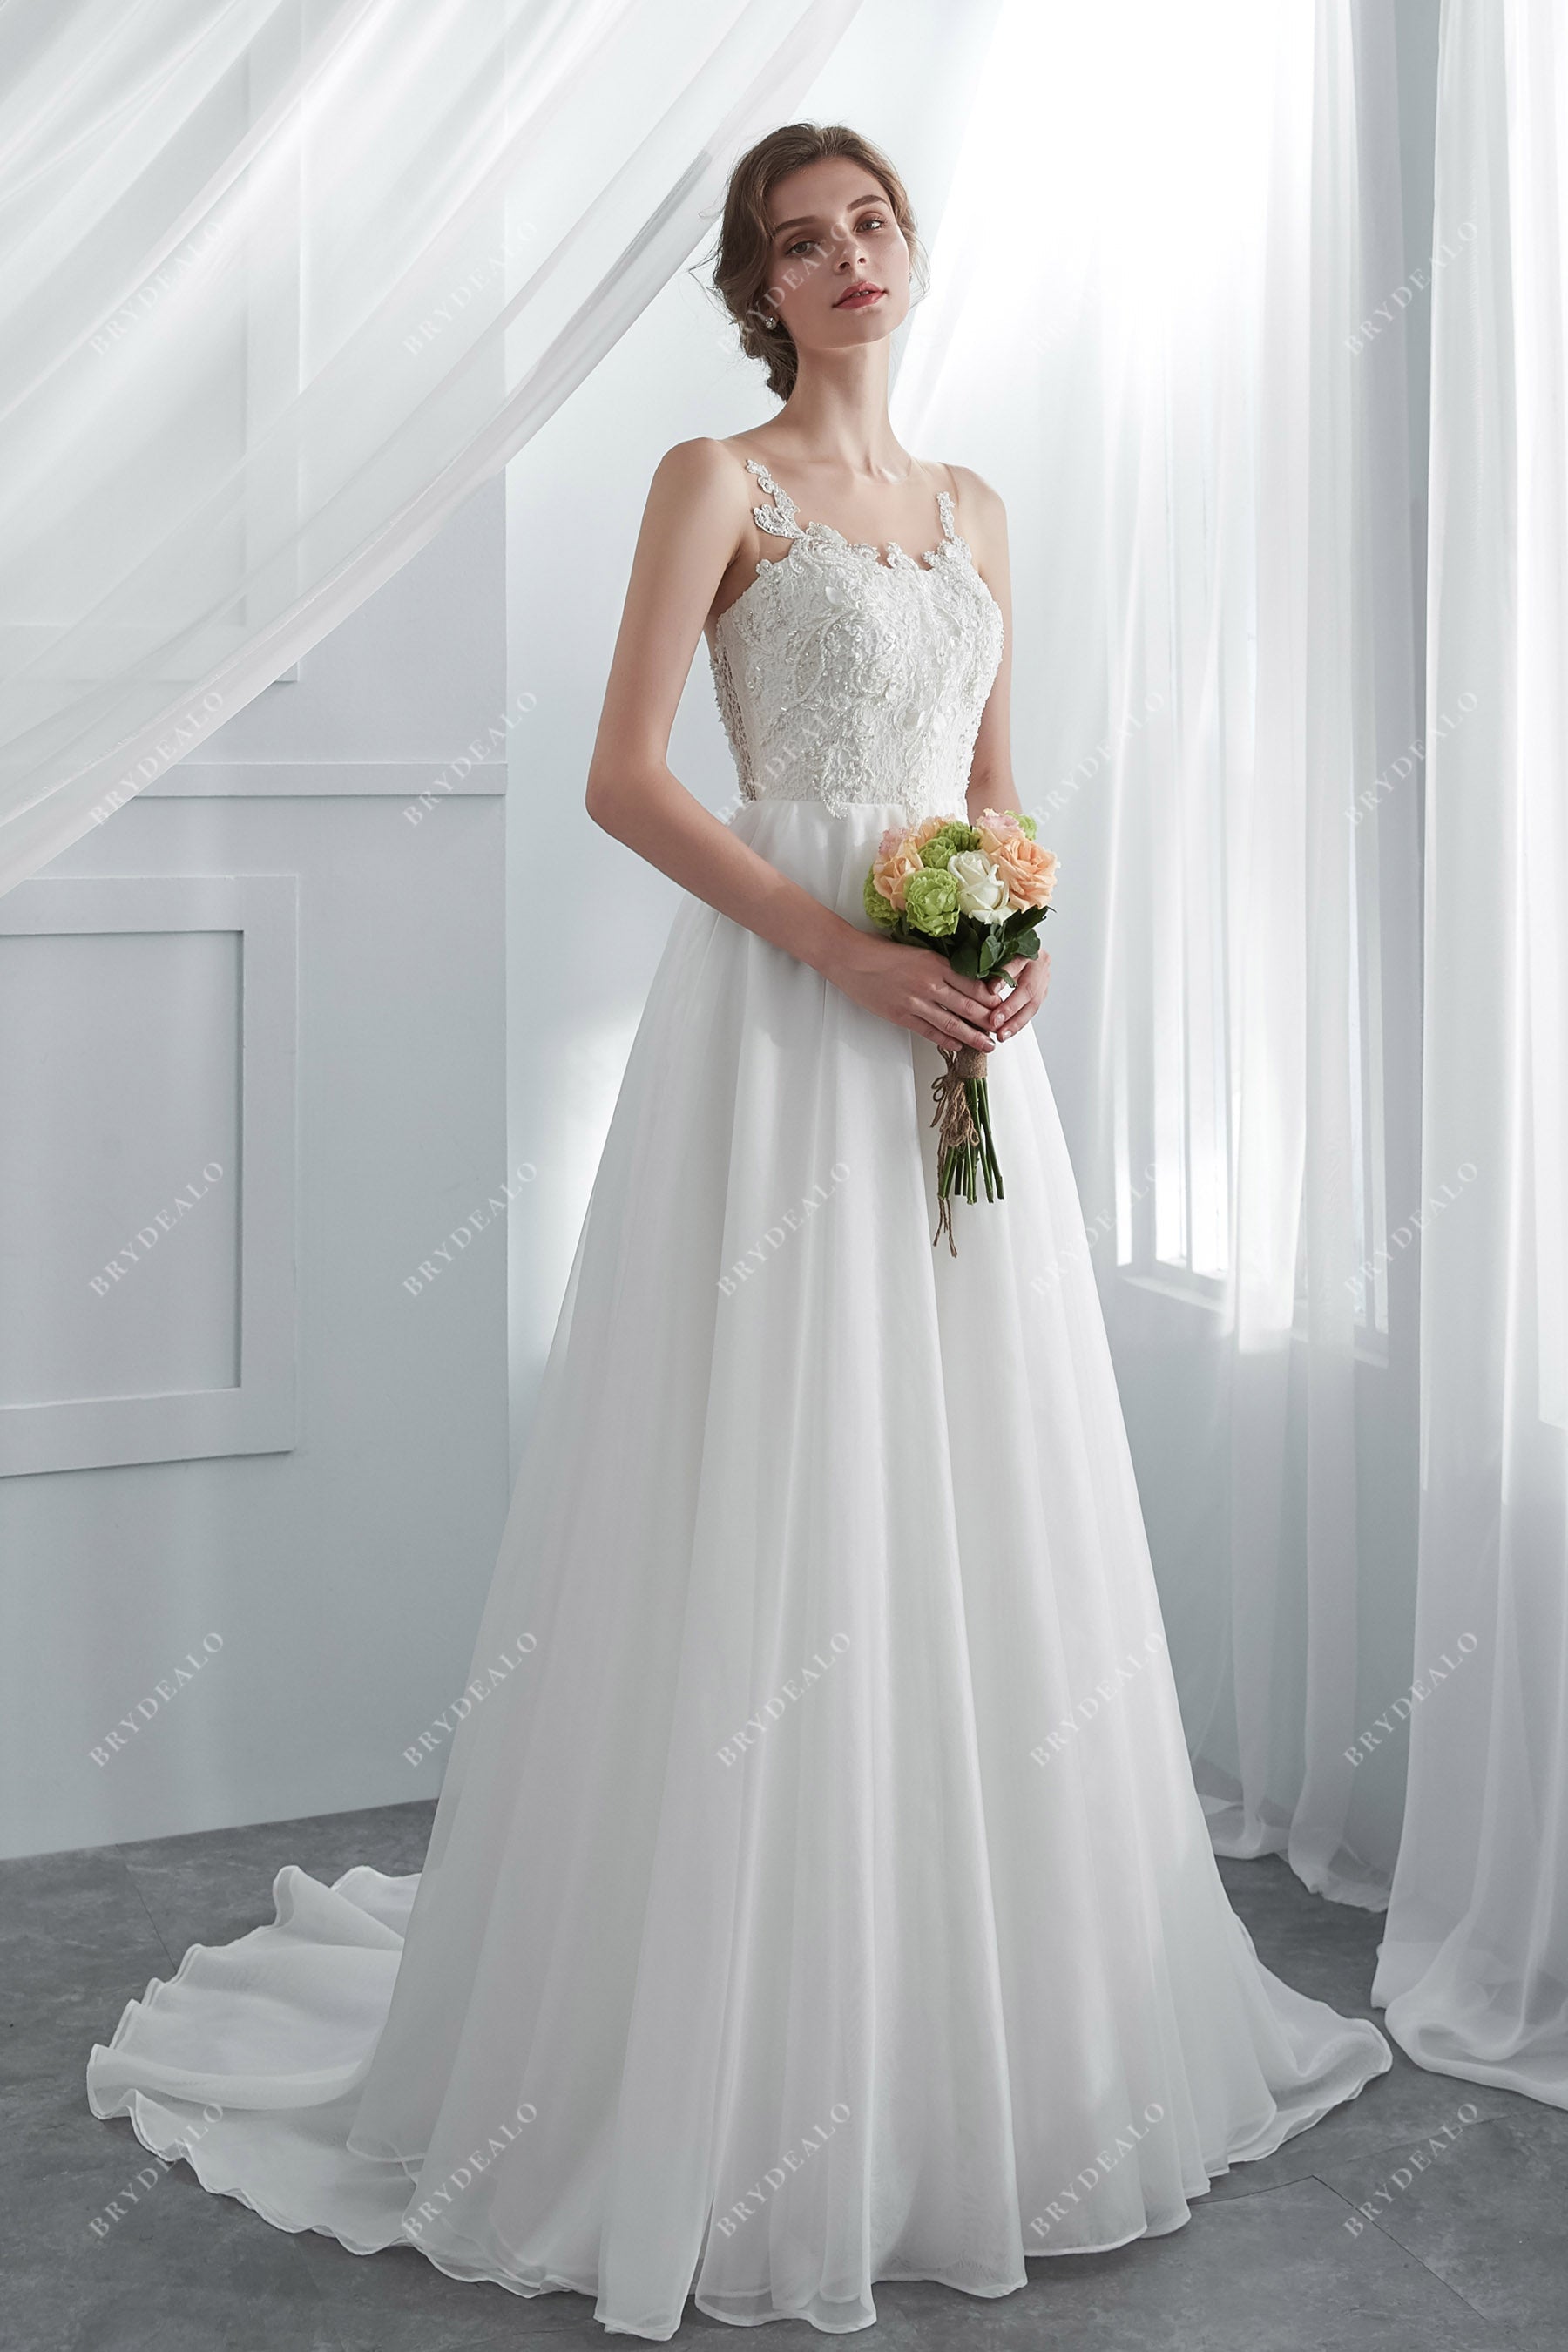 Designer Beaded Floral Lace Organza Bridal Gown